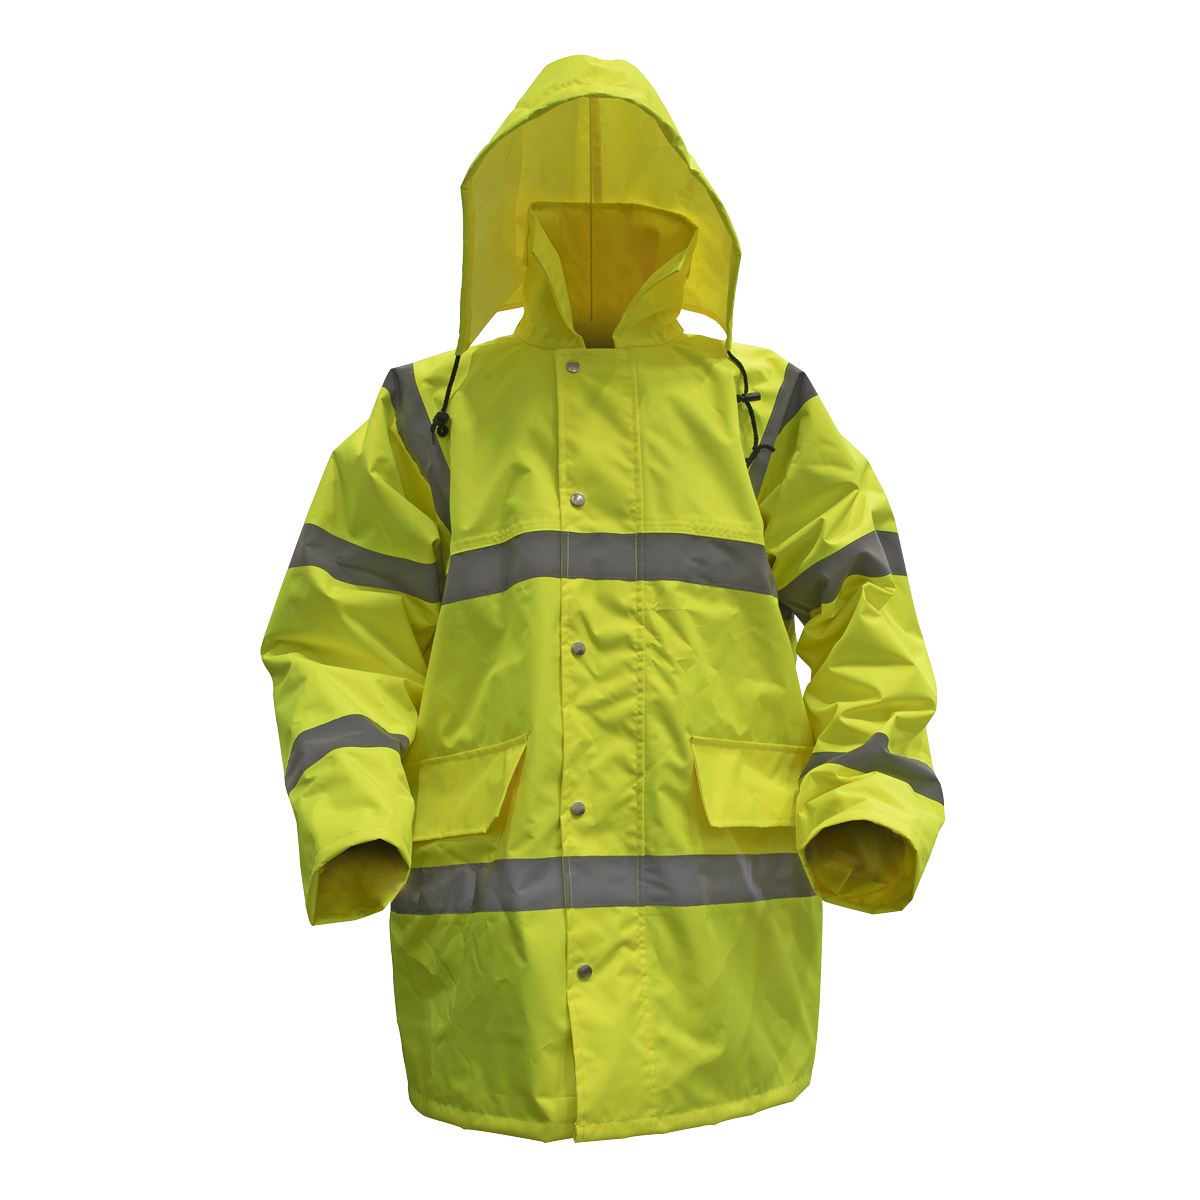 Worksafe by Sealey Hi-Vis Yellow Motorway Jacket with Quilted Lining - X-Large